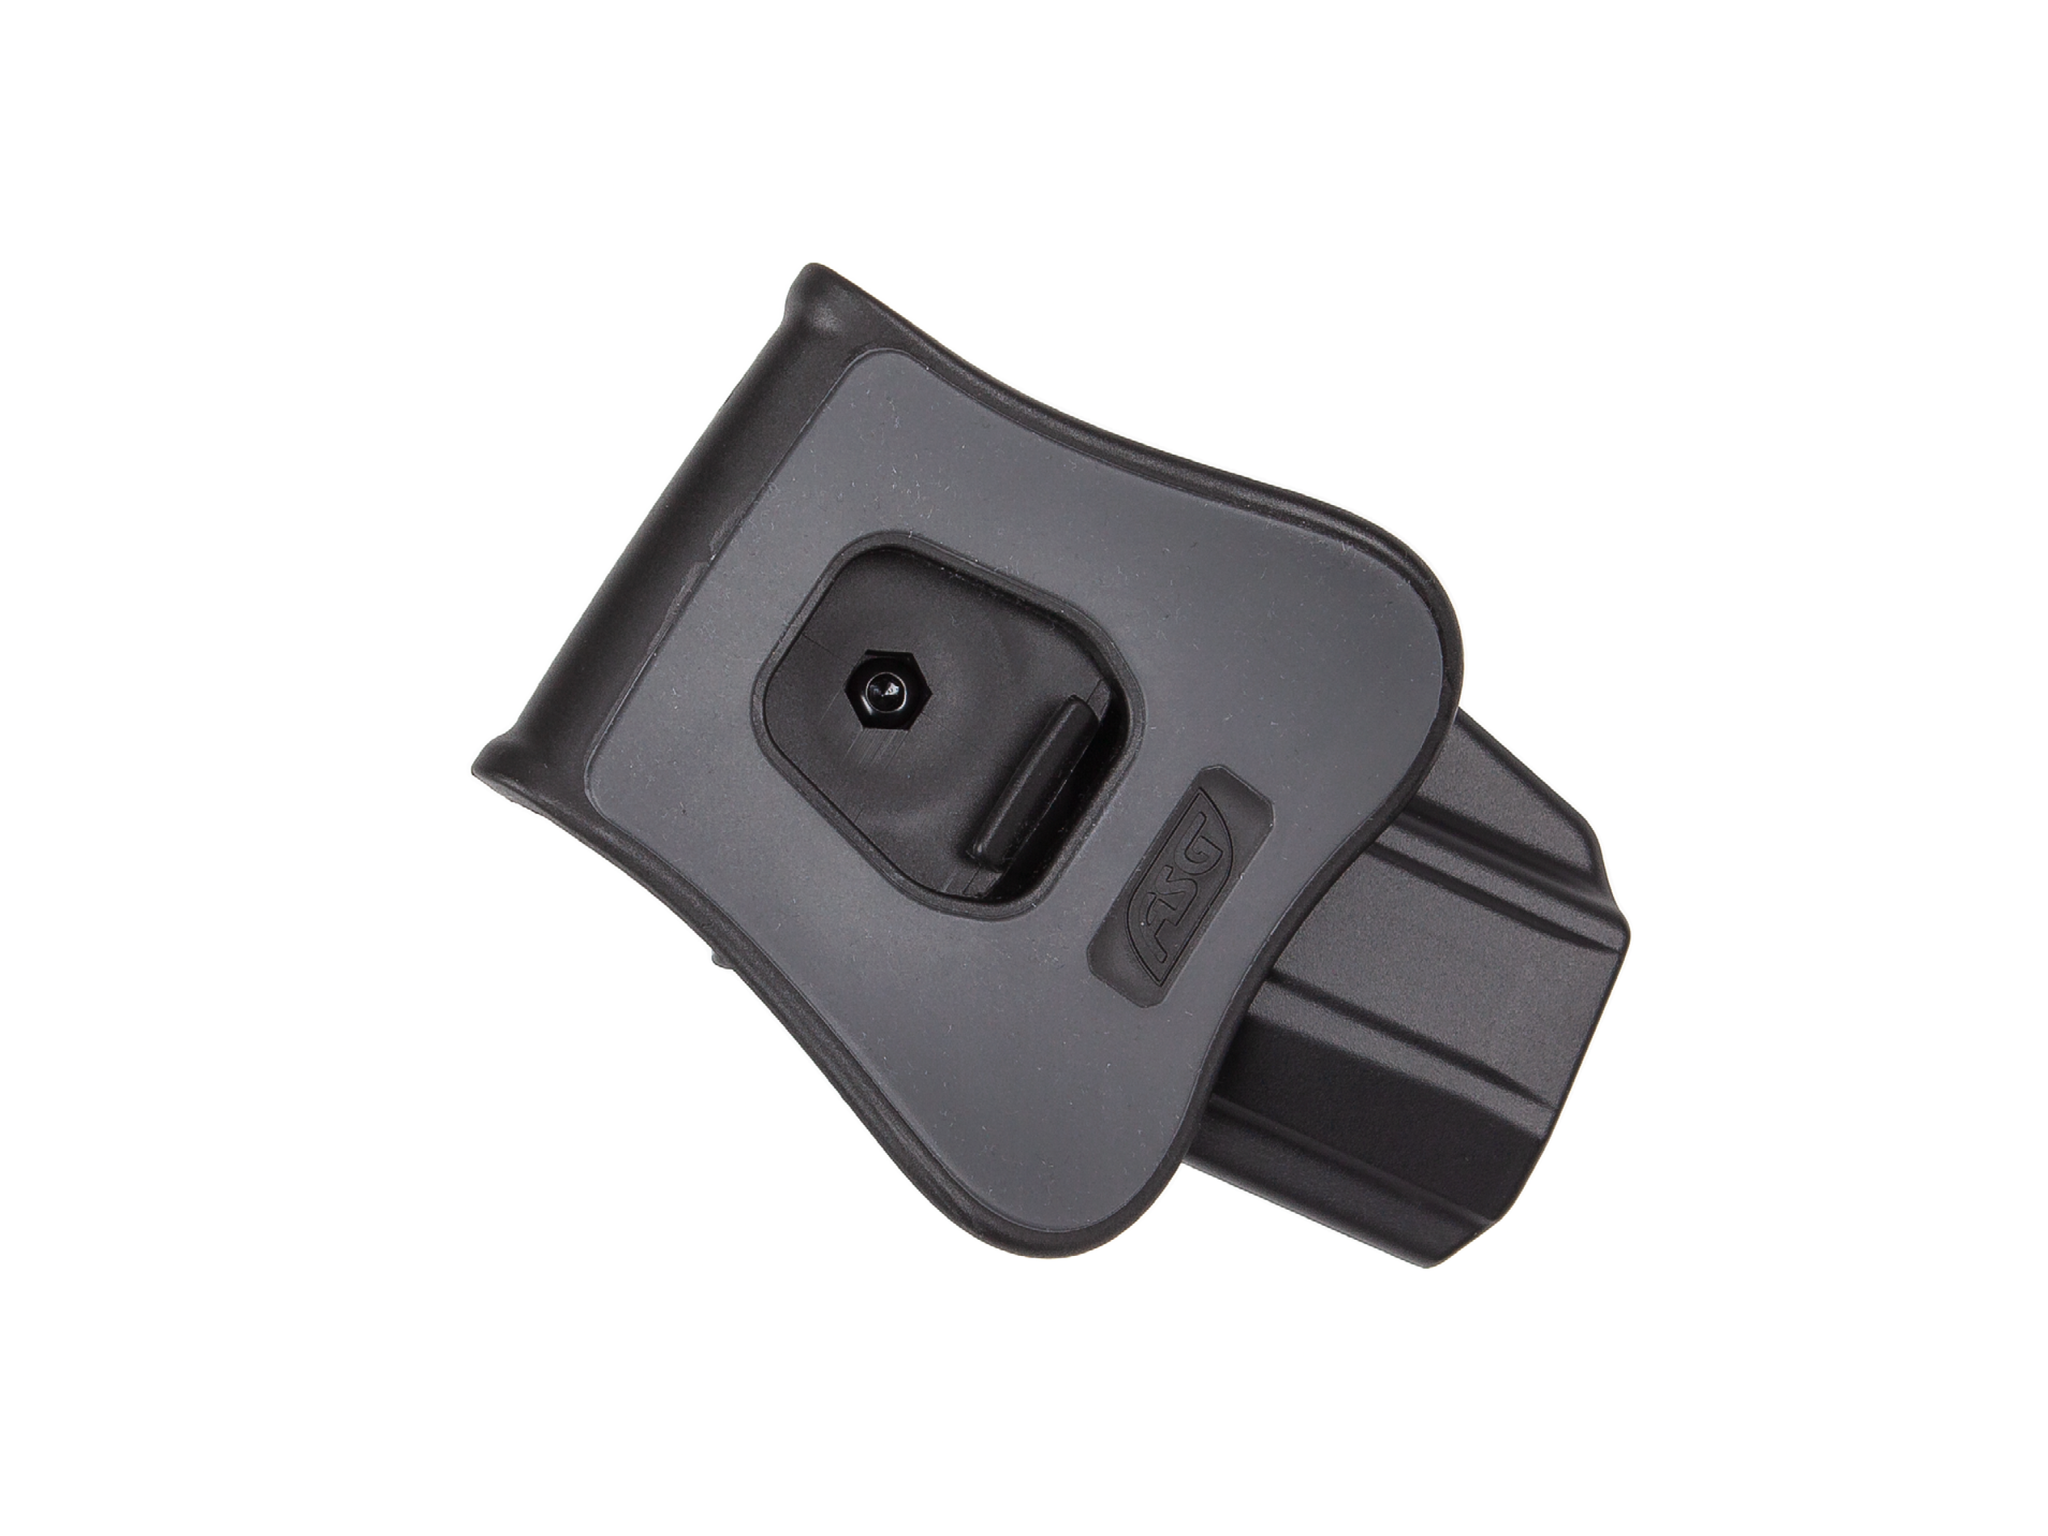 ASG Paddle Holster CZ P-07, P-09, P-09 OR, CZ75 and SP-01 Shadow- BK